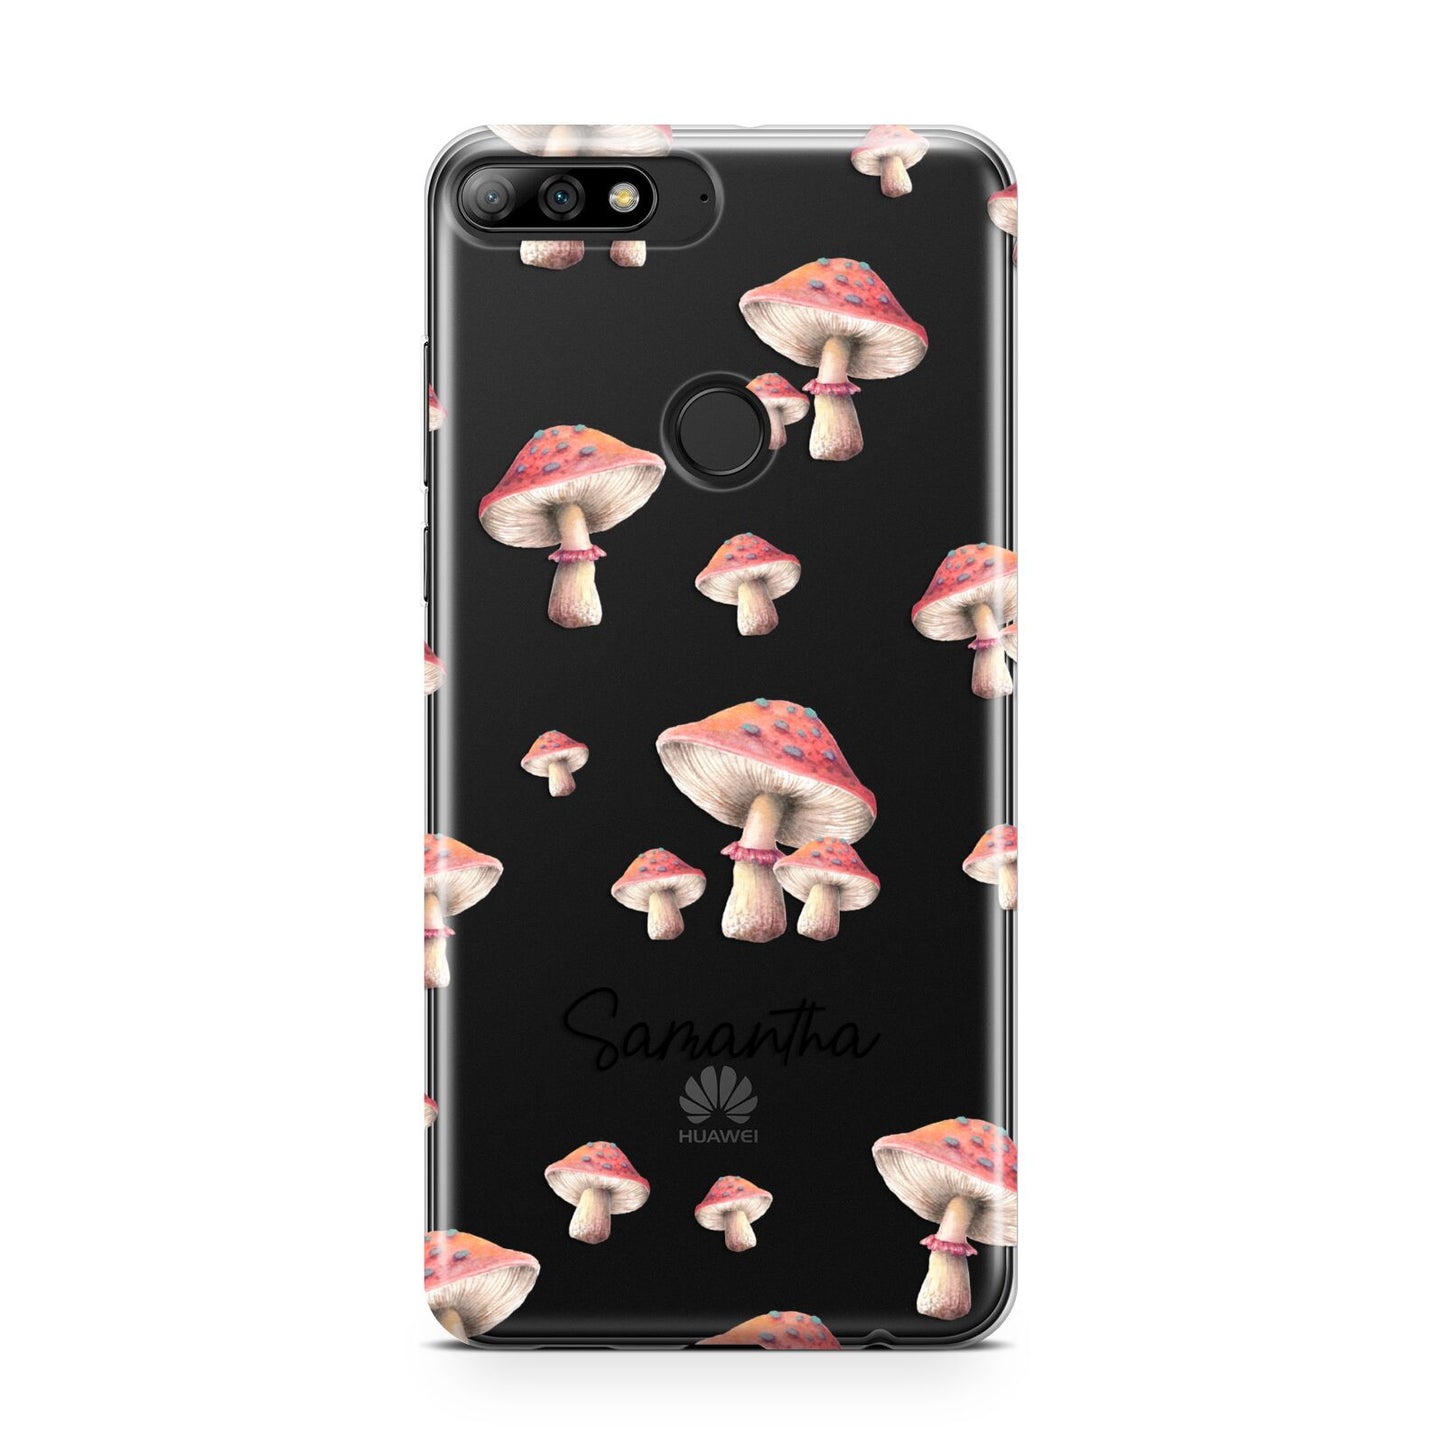 Mushroom Illustrations with Name Huawei Y7 2018